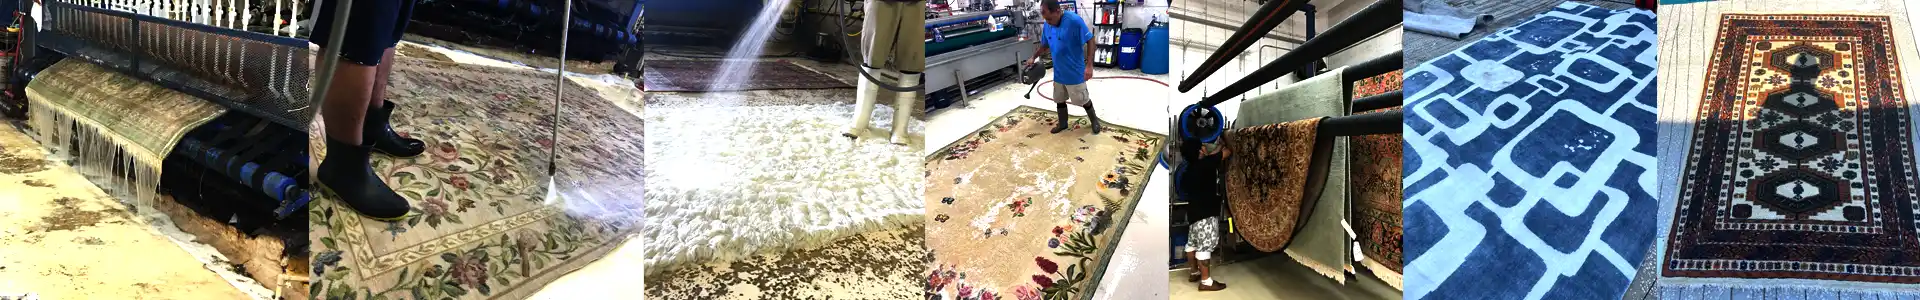 Rug Cleaning Services Pompano Beach